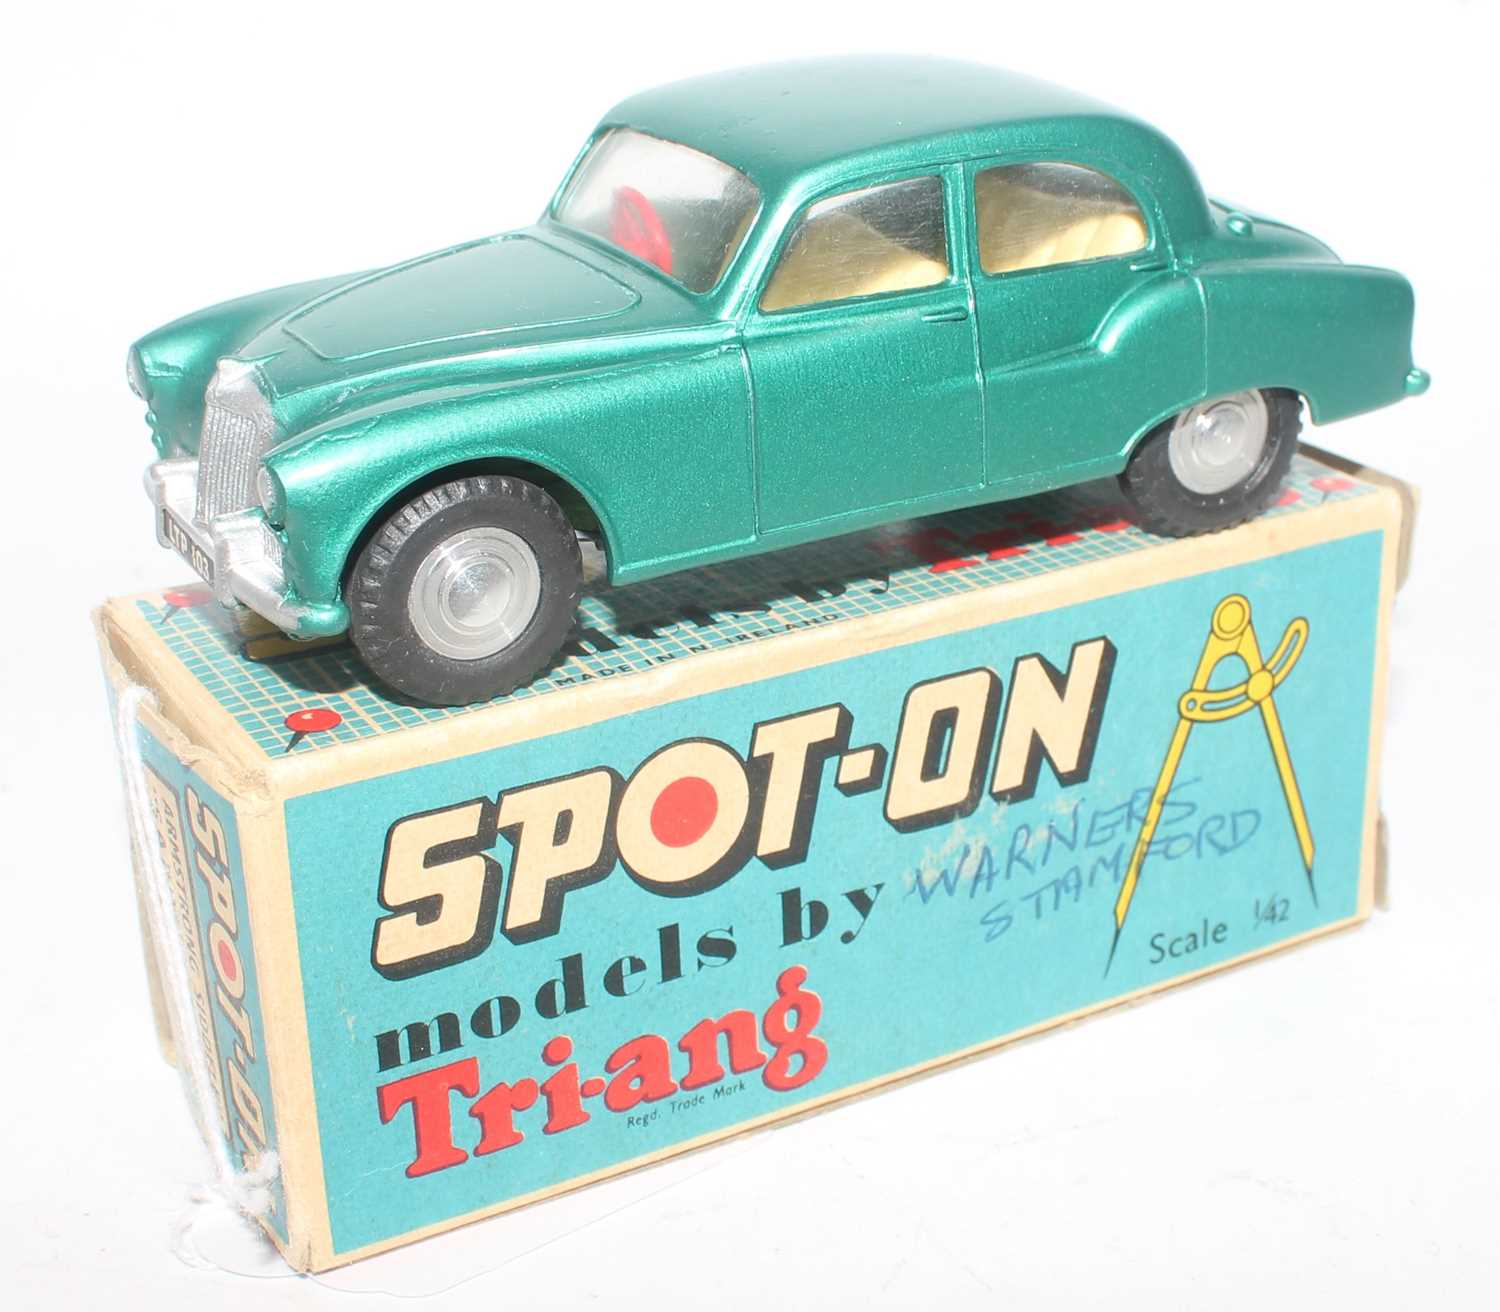 Spot-On by Triang, No.101 Armstrong Siddeley Sapphire 236, metallic green body, comes in an original